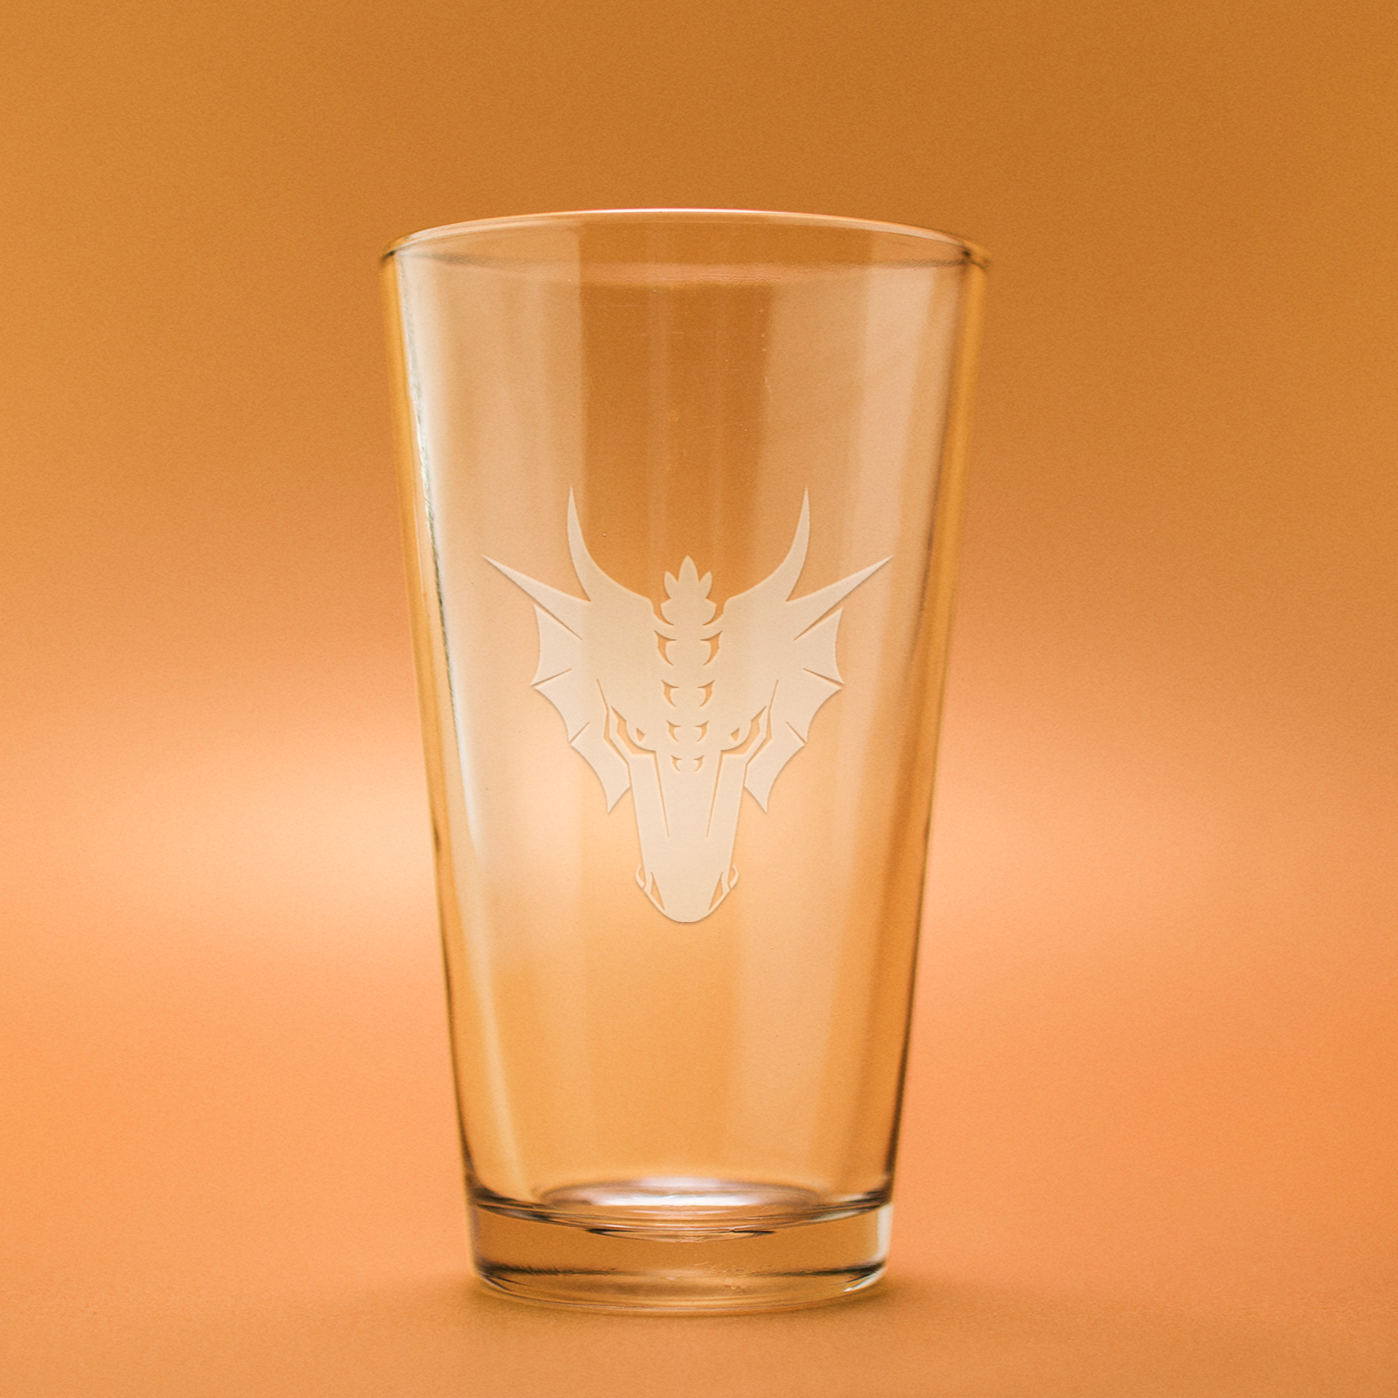 Dragon Head Fantasy Game Etched Beer Style Glass